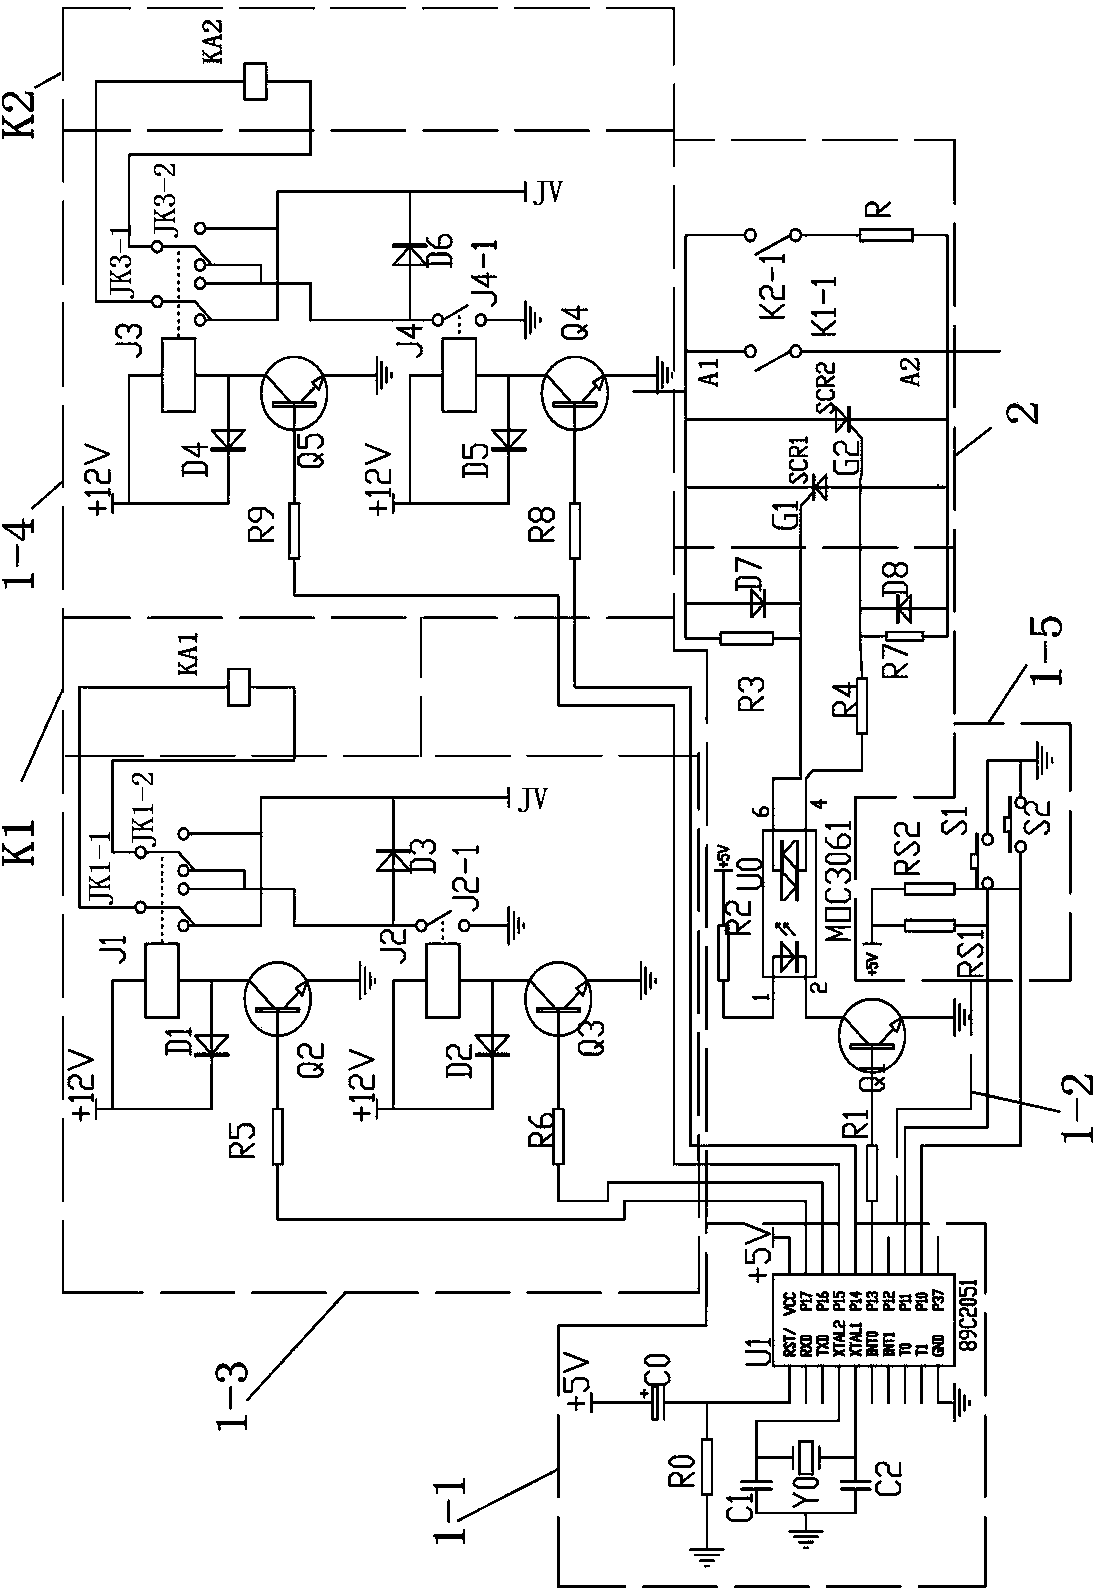 Combination switch with intelligent zero-crossing switching function